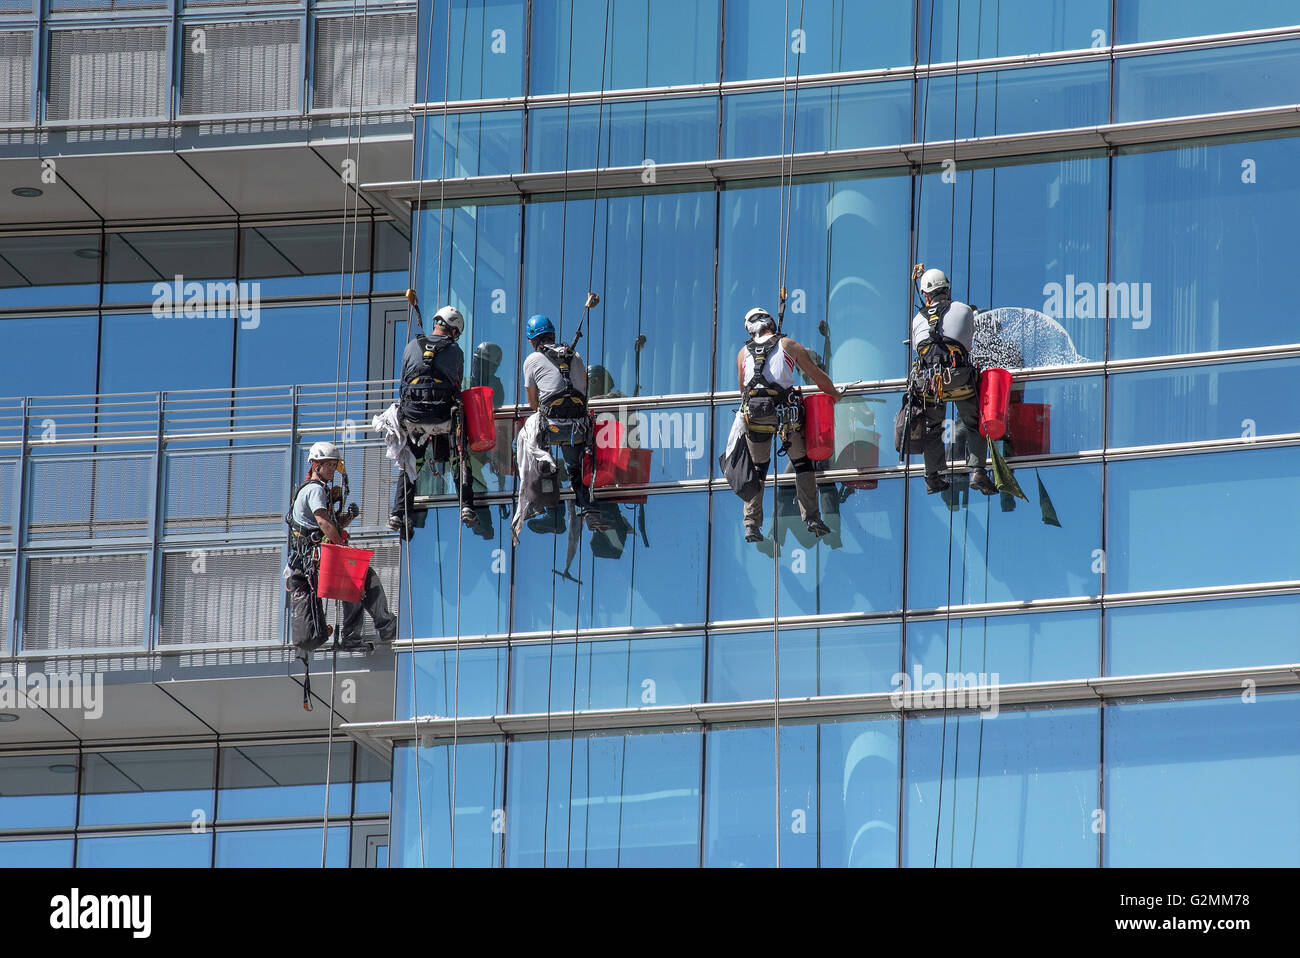 Group of window cleaners suspended from cables Stock Photo